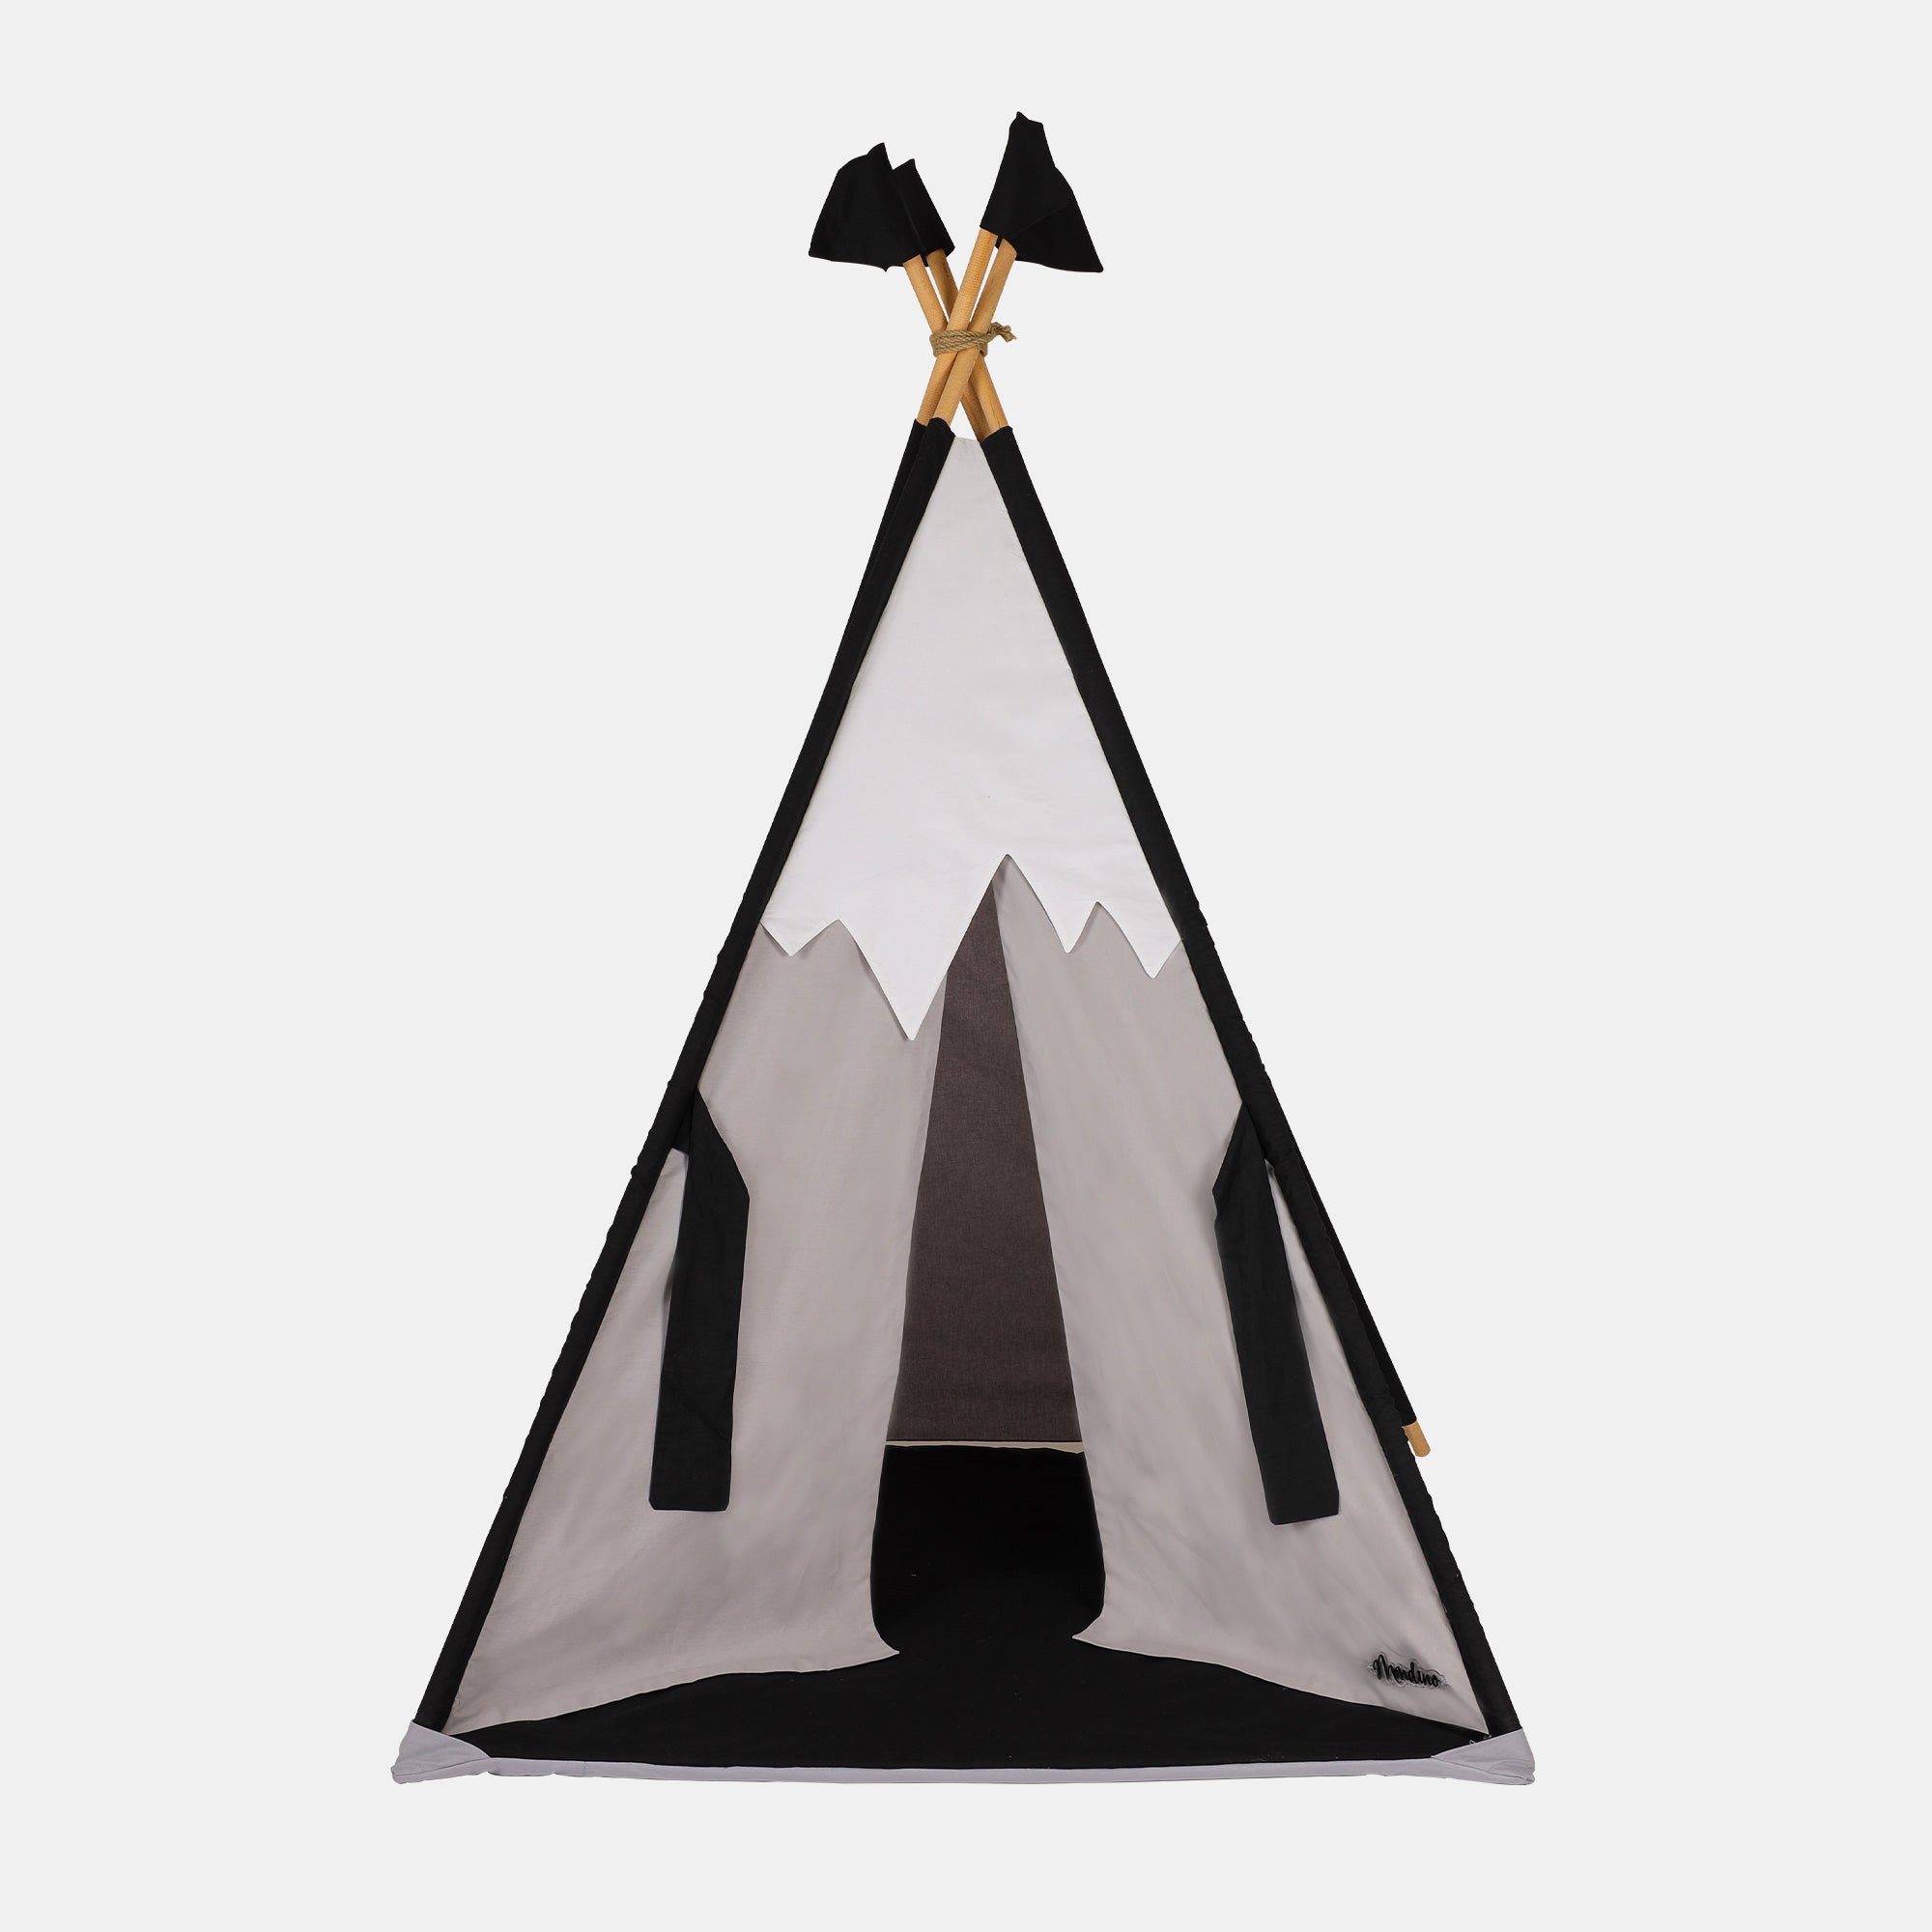 Cowboy Style Children's Teepee Tent